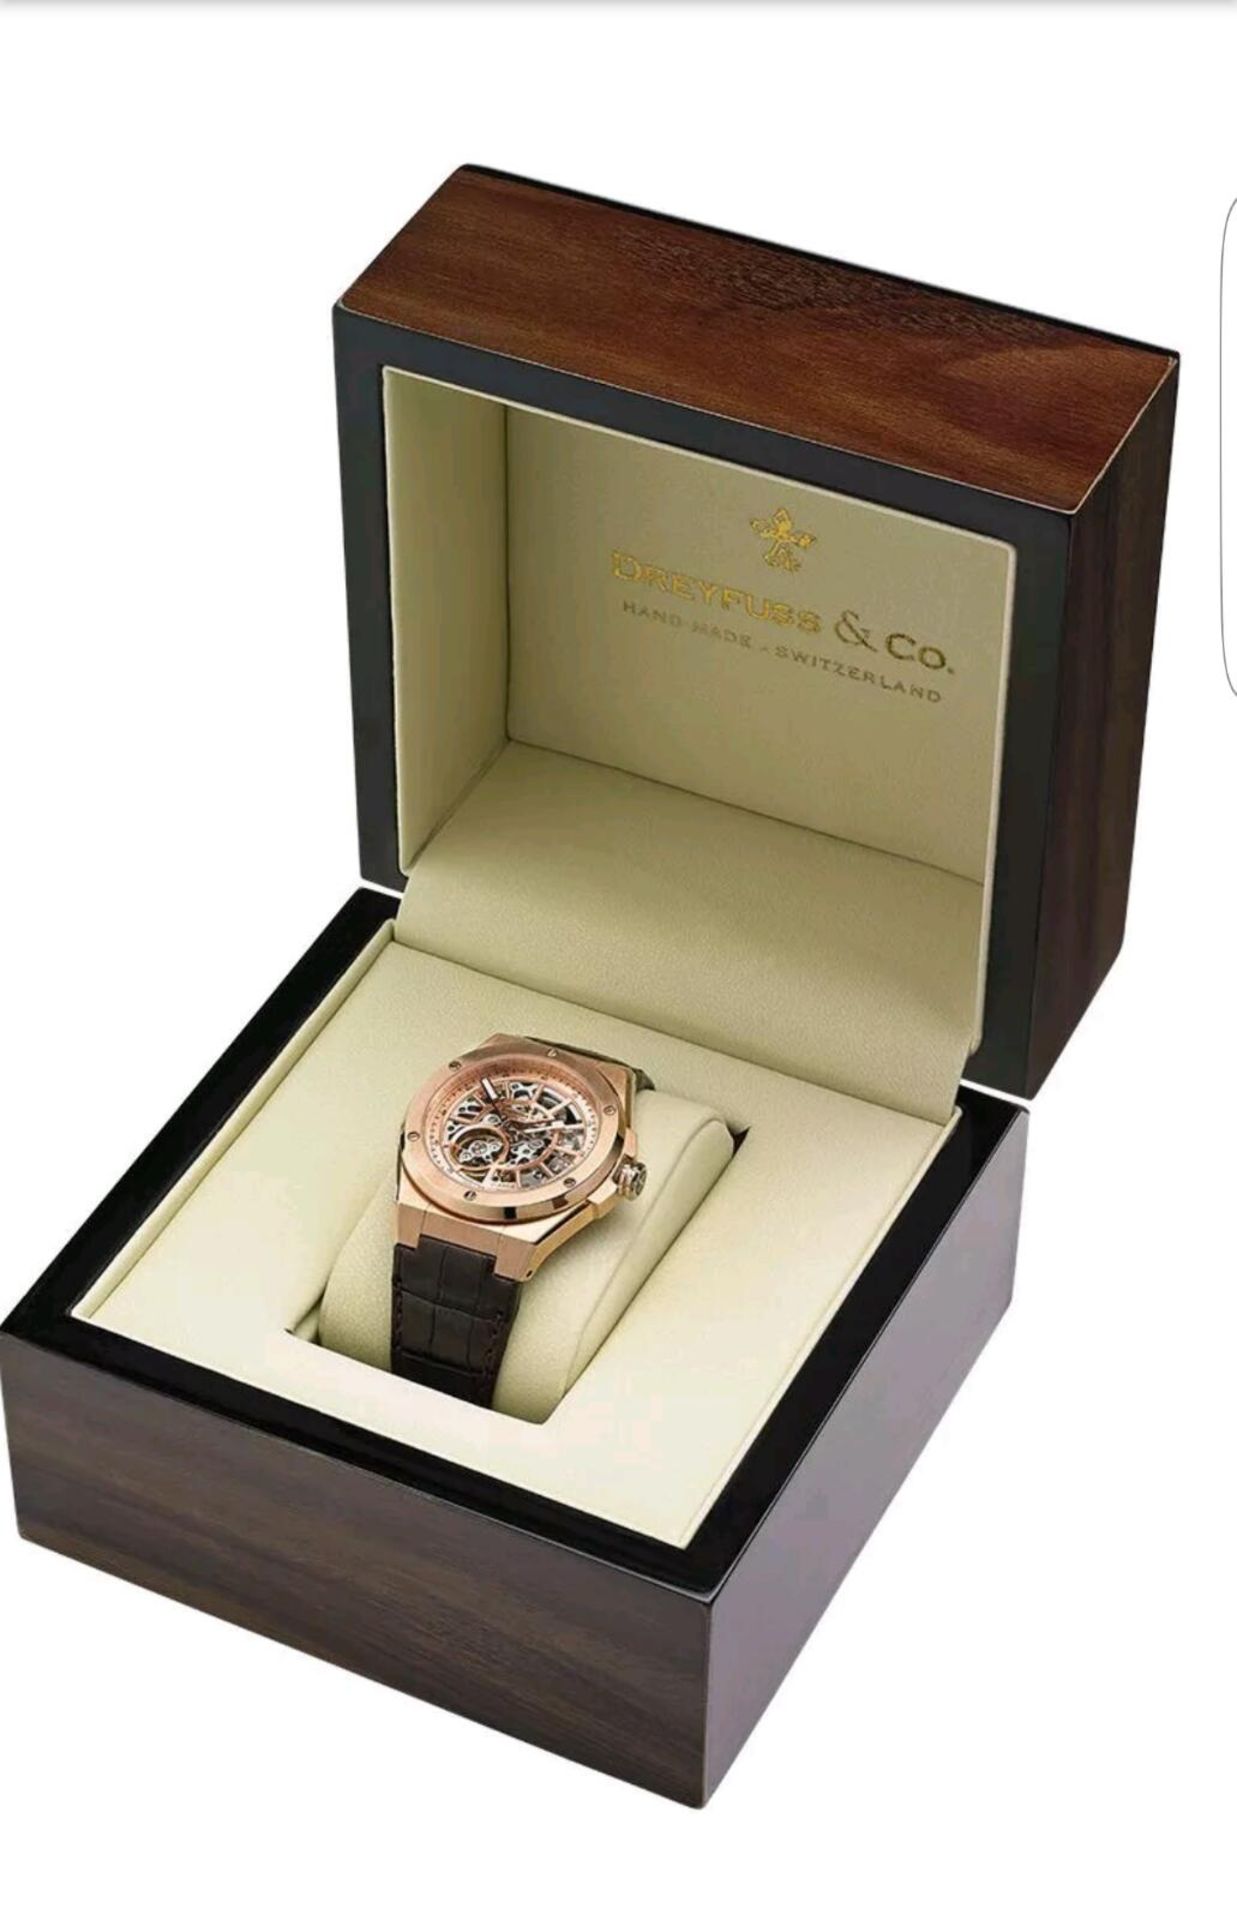 BRAND NEW DREYFUSS & CO DGS00083/25 MENS SKELETON AUTOMATIC WATCH, COMPLETE WITH ORIGINAL BOX AND - Image 2 of 2